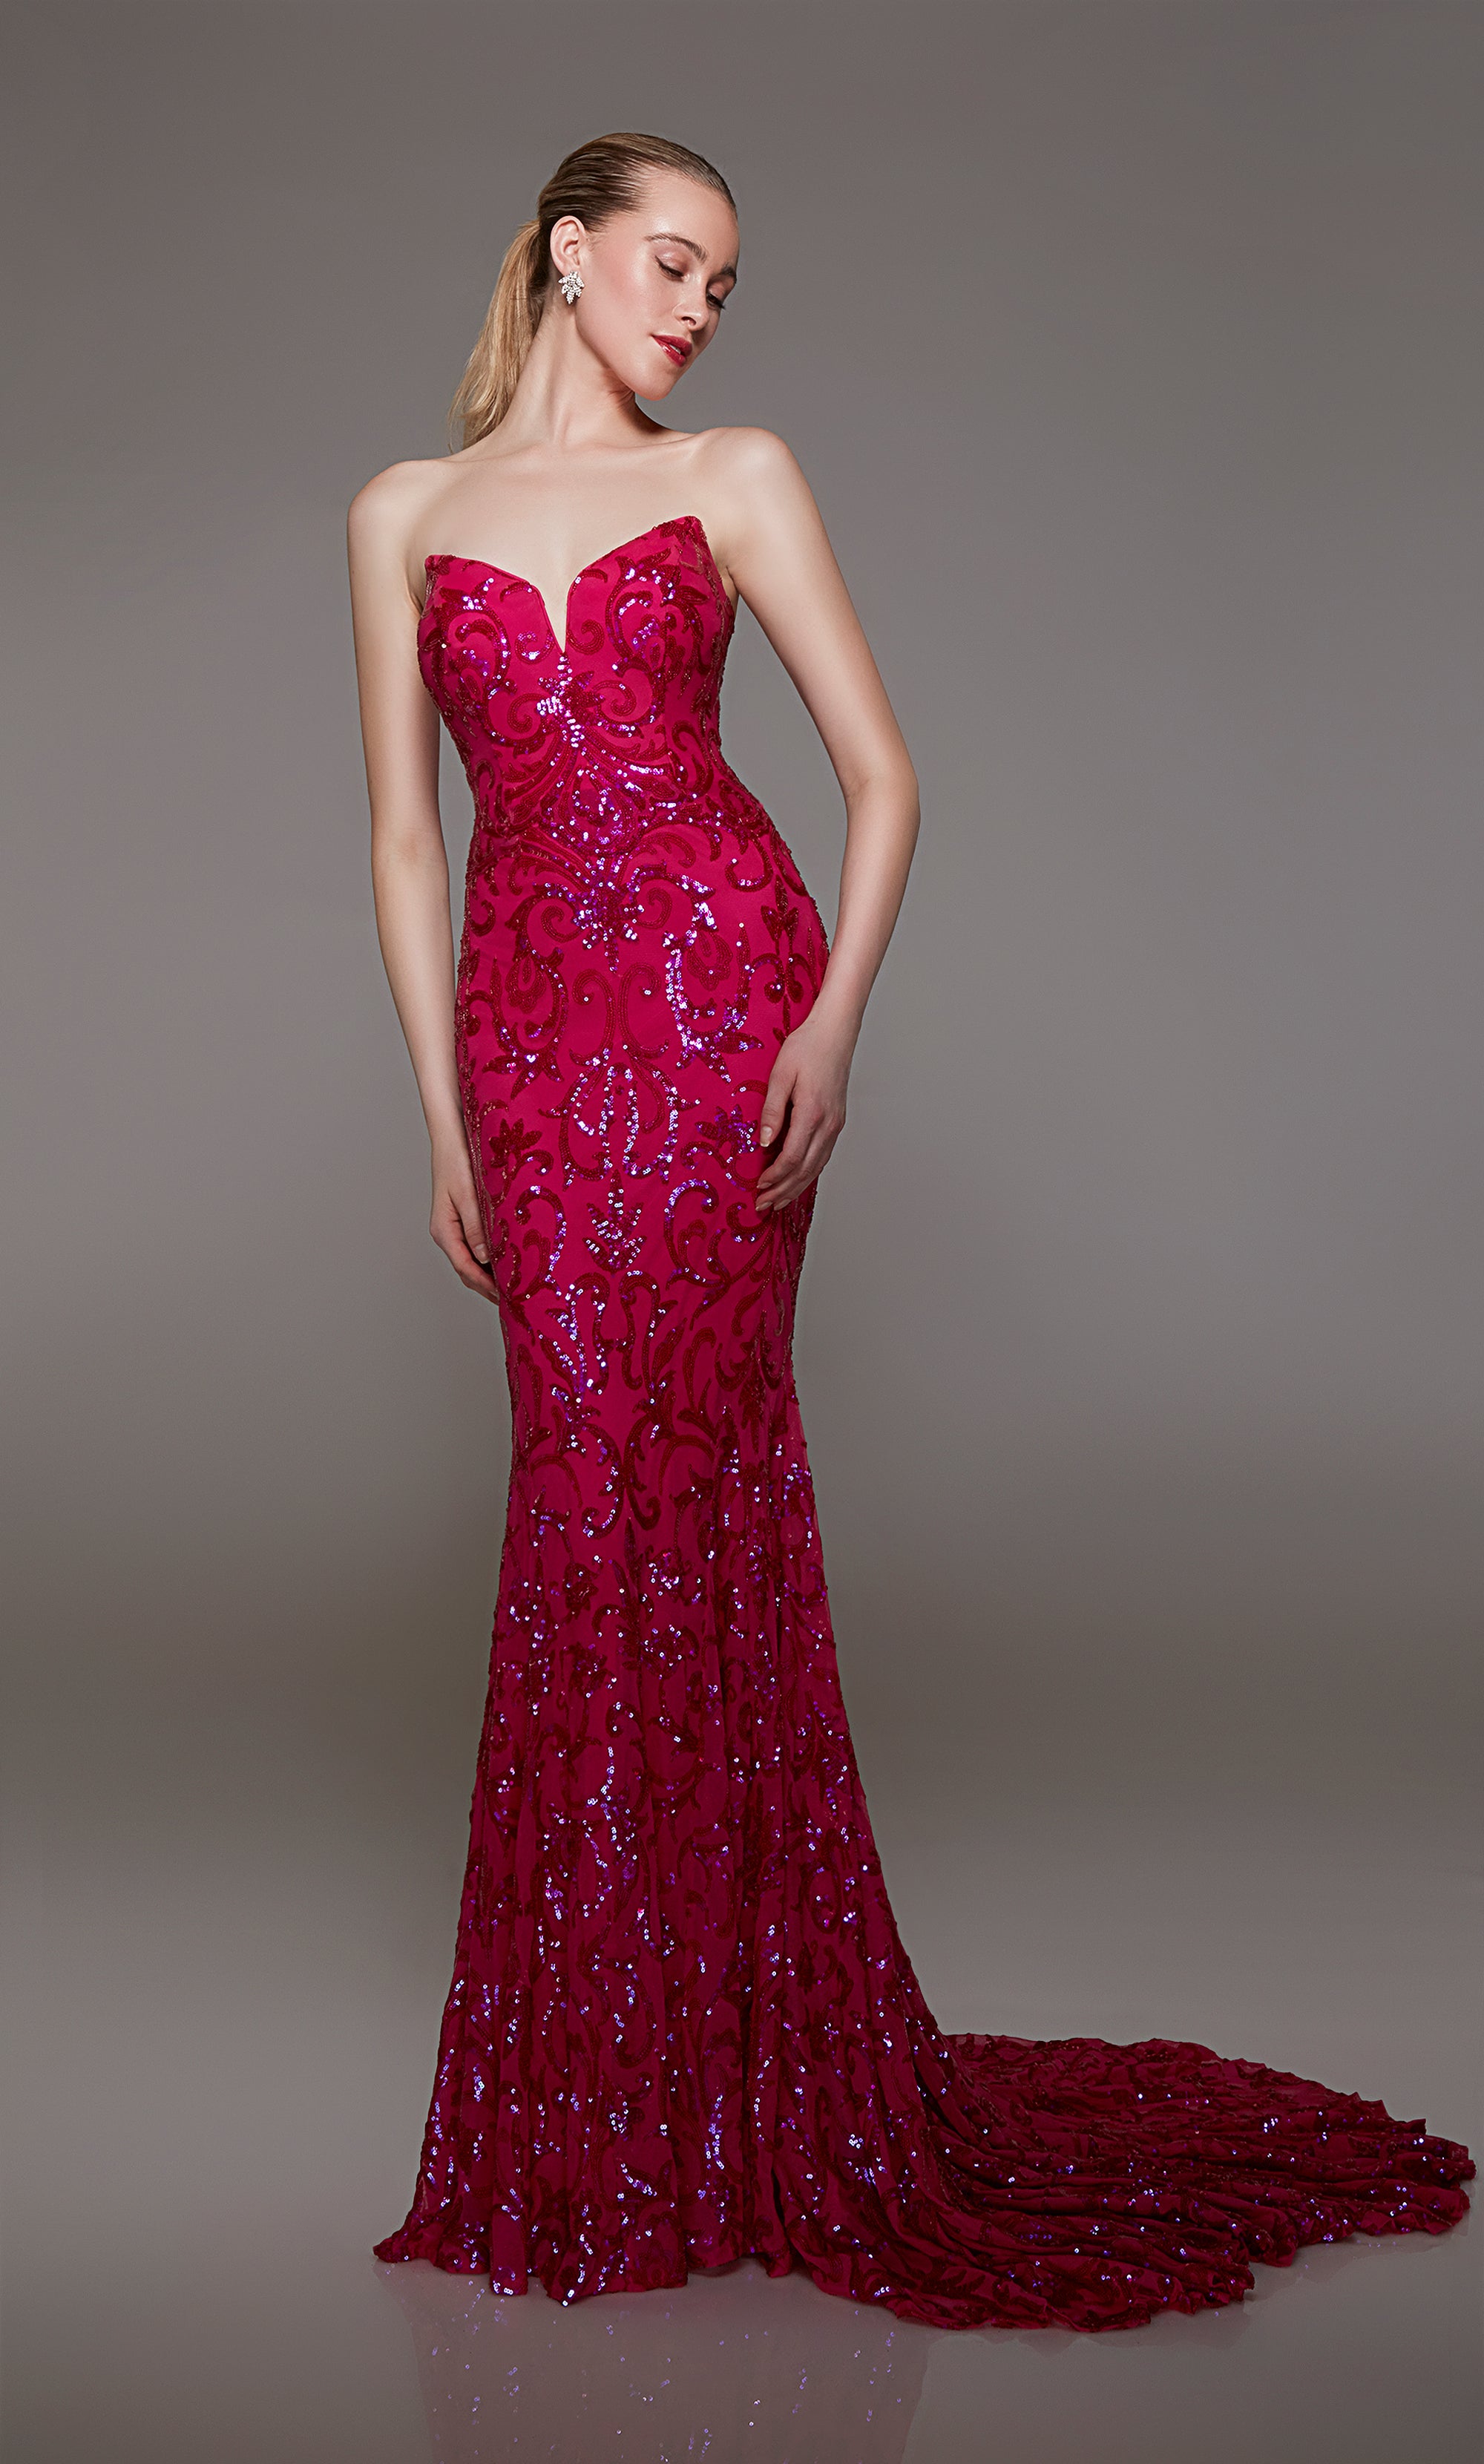 Pink strapless designer dress adorned with delicate sequin embellishments, featuring an lace-up back and an long glamorous train for an truly elegant look.